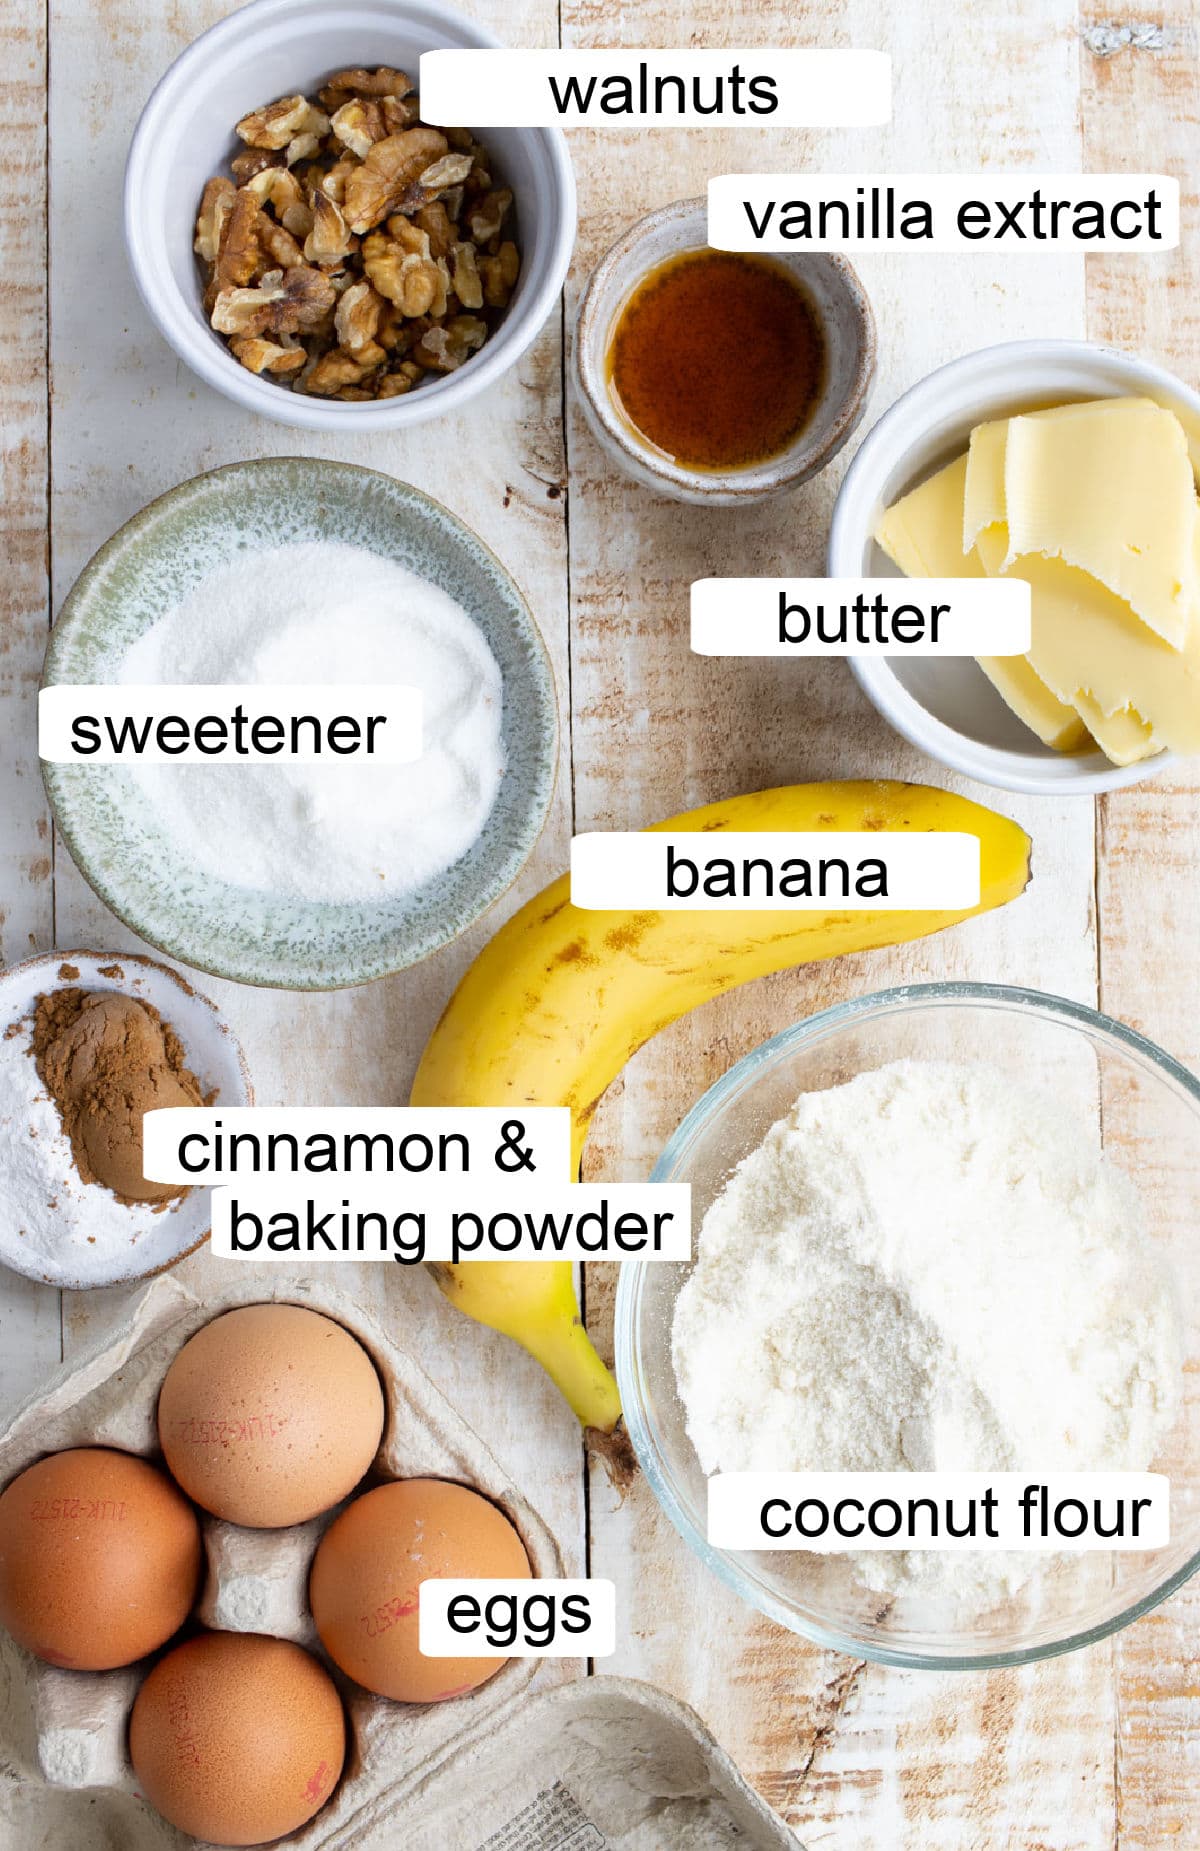 Ingredients to make these muffins are measured into bowls and labelled.